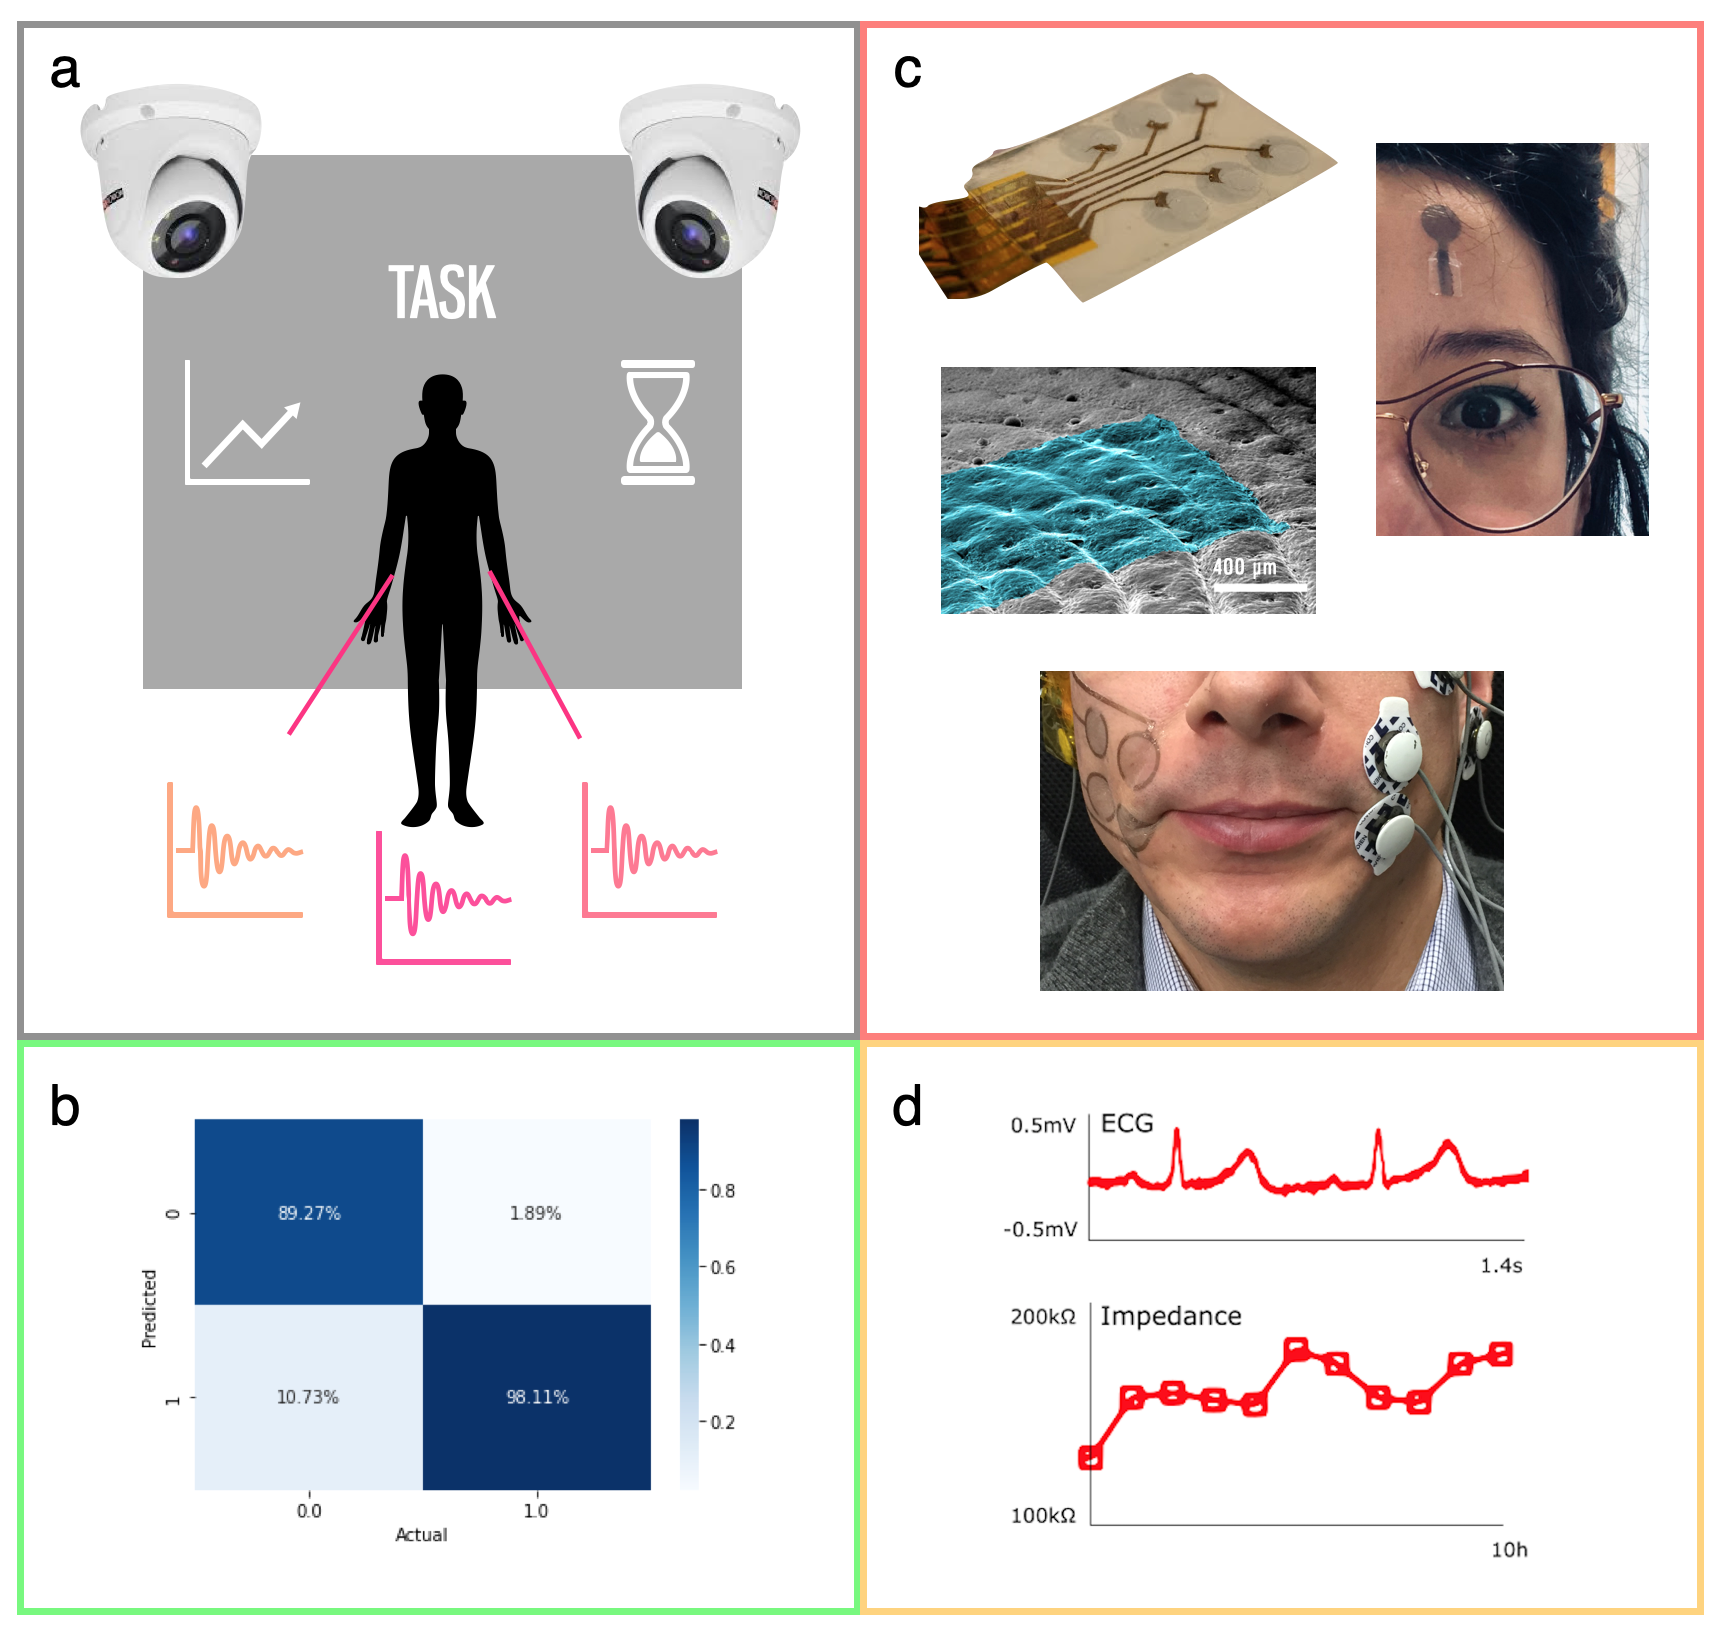 a. A representation of a UC for emotion recognition in our paradigm. b. Machine learning on biosignals, Classification of electroencephalography (EEG). c. Tattoo technology. From top, clockwise: Tattoo Multielectrodes array; a tattoo electrode on the forehead for EEG recording; tattoo and standard electrodes on the face for facial electromyography (fEMG); a tattoo substrate onto a skin replica. d. Biosignals acquired with tattoo in short- and long- term scenarios